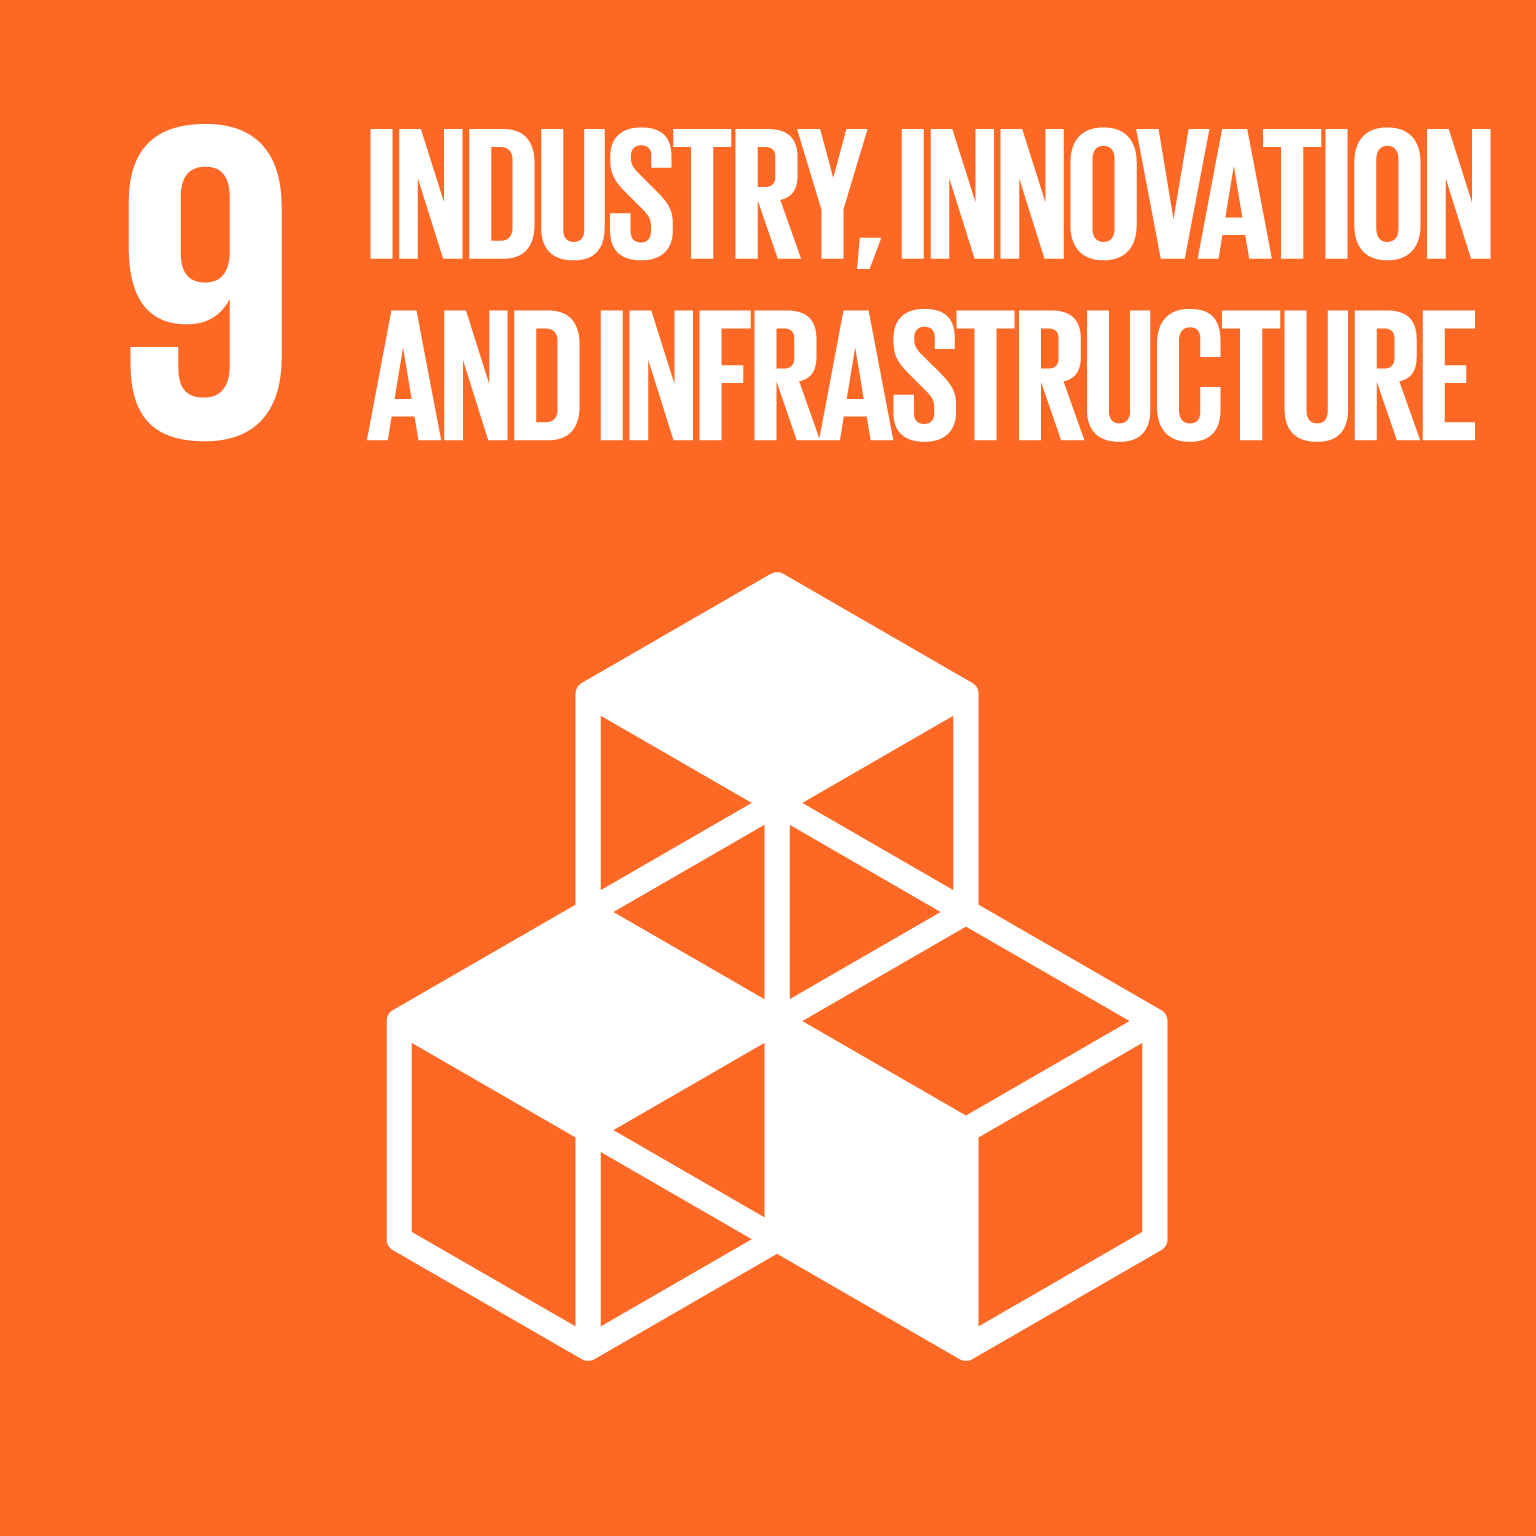 【SDGs logo】INDUSTRY, INNOVATION AND INFRASTRUCTURE